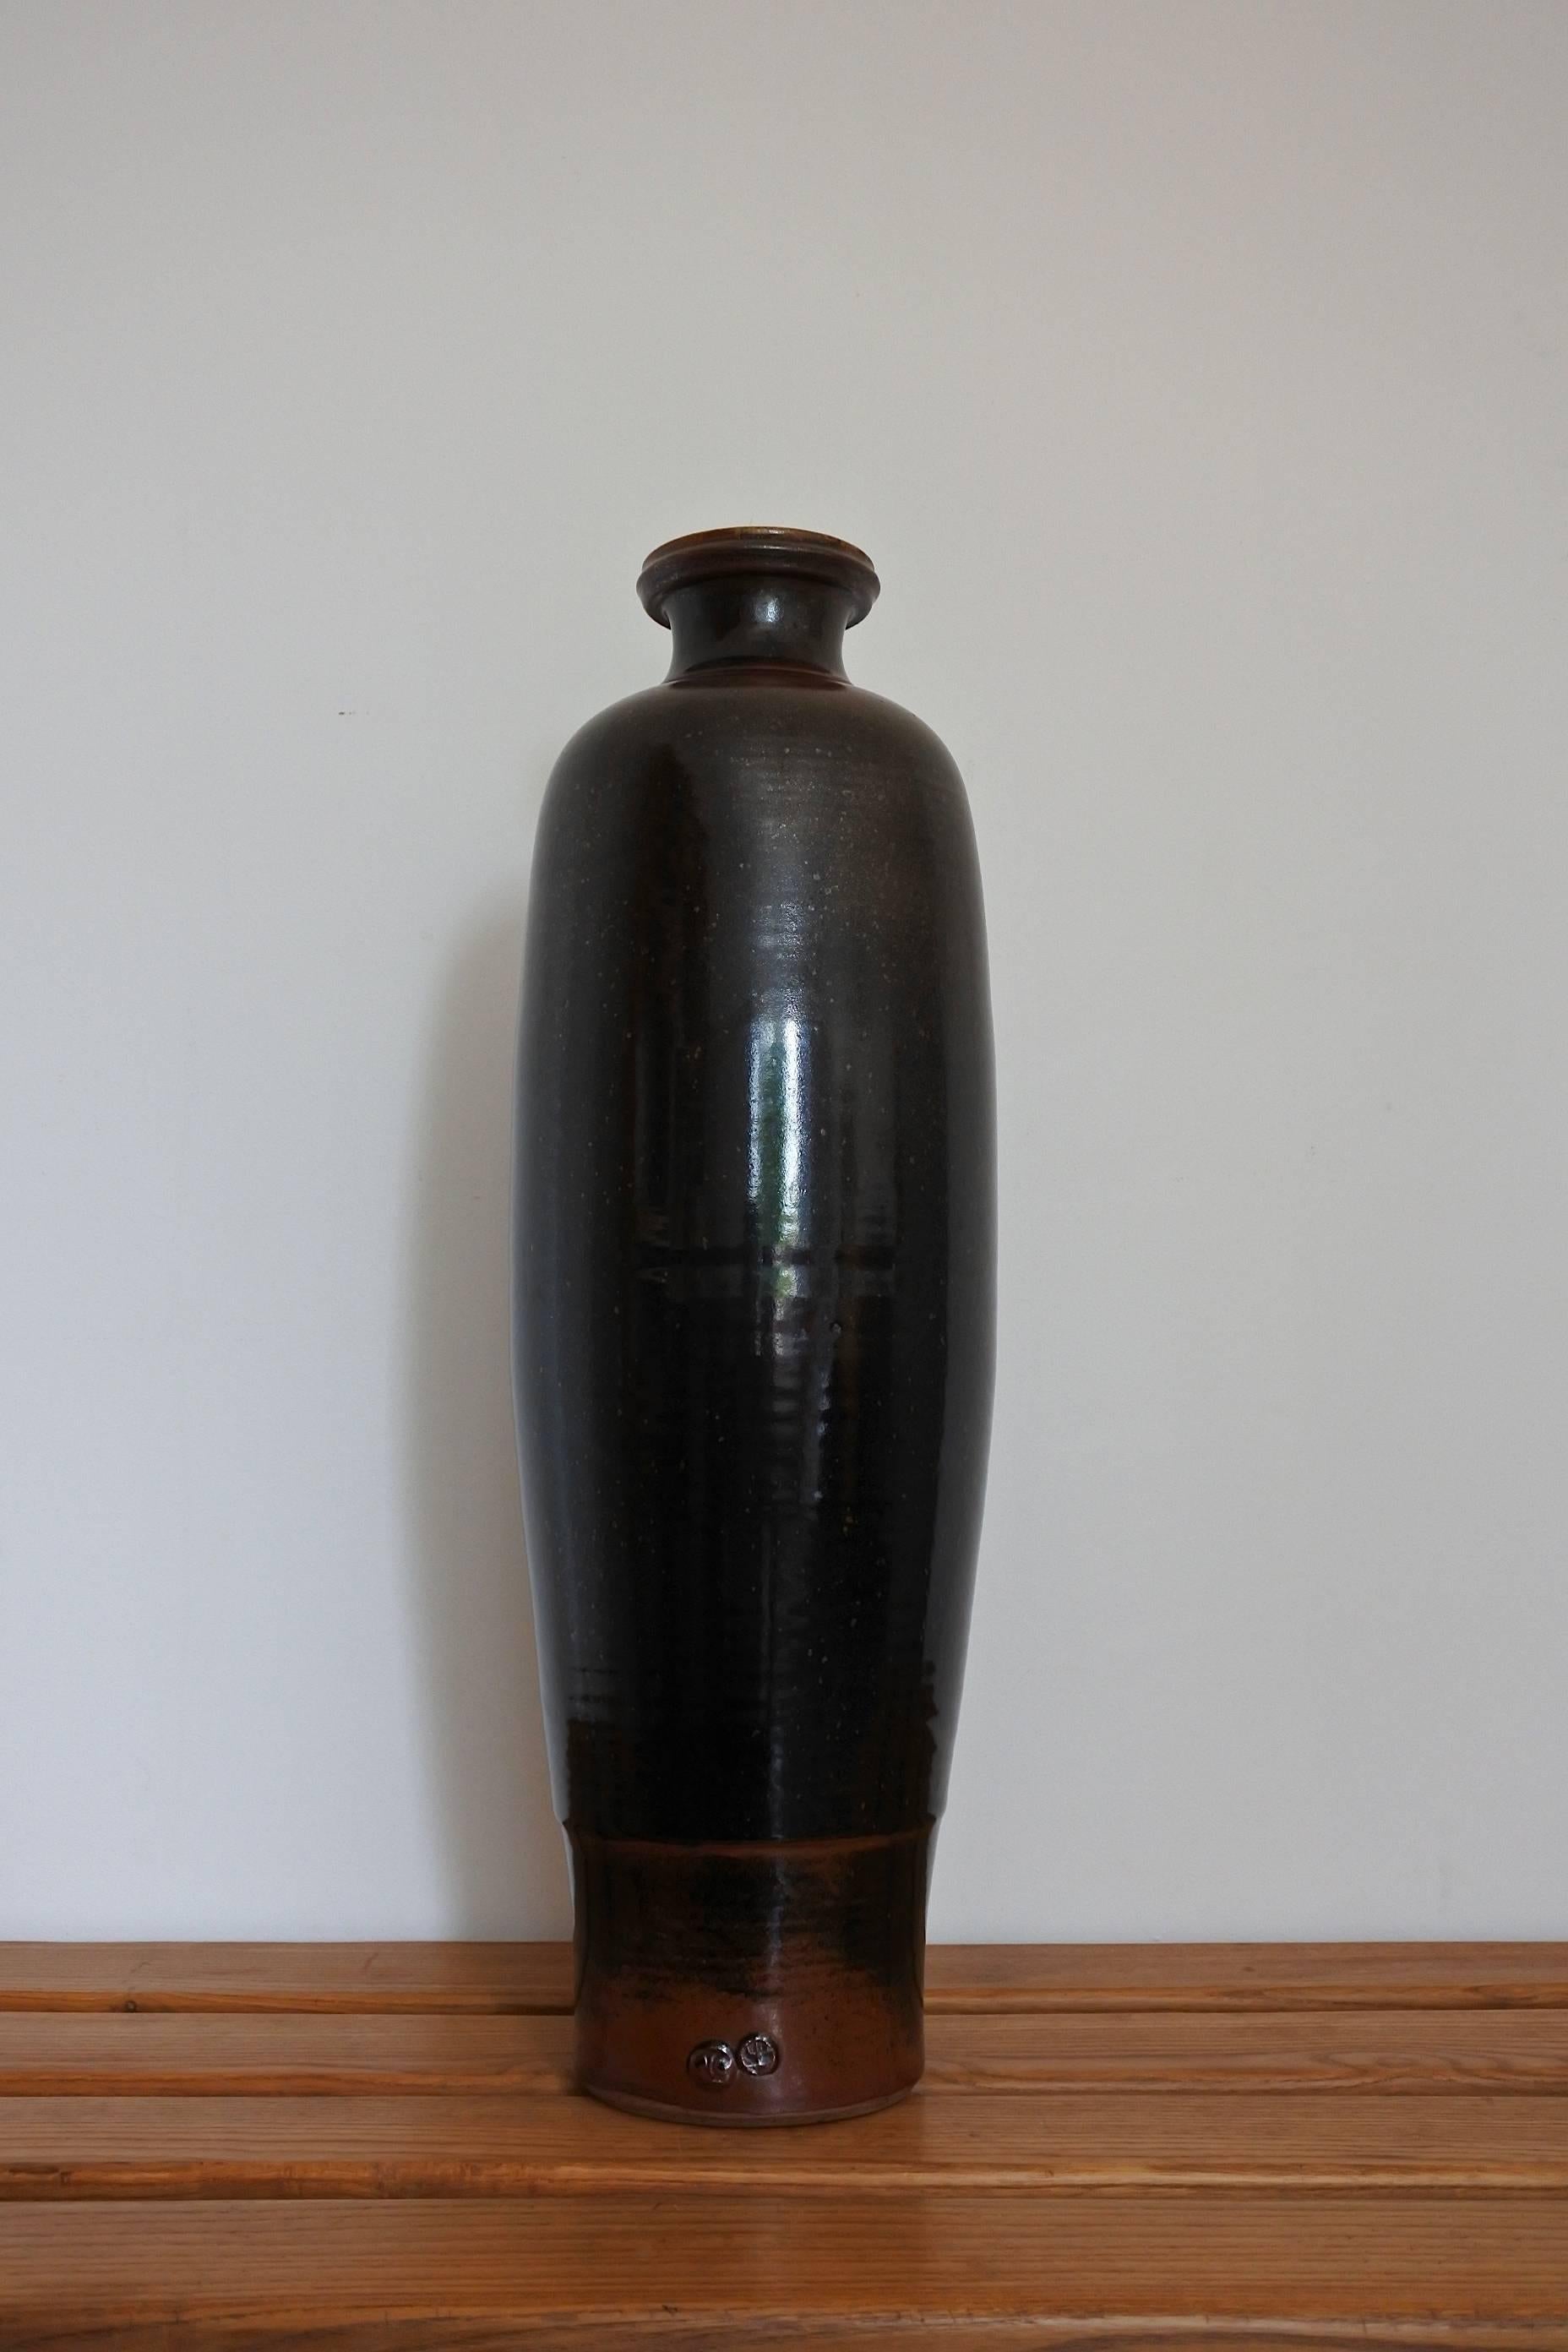 Large enamelled earthenware vase, France, 1960s.
Japanese inspiration.
Most likely made in the pottery center of La Borne or Saint Amand-en-Puisaye.
Signed.